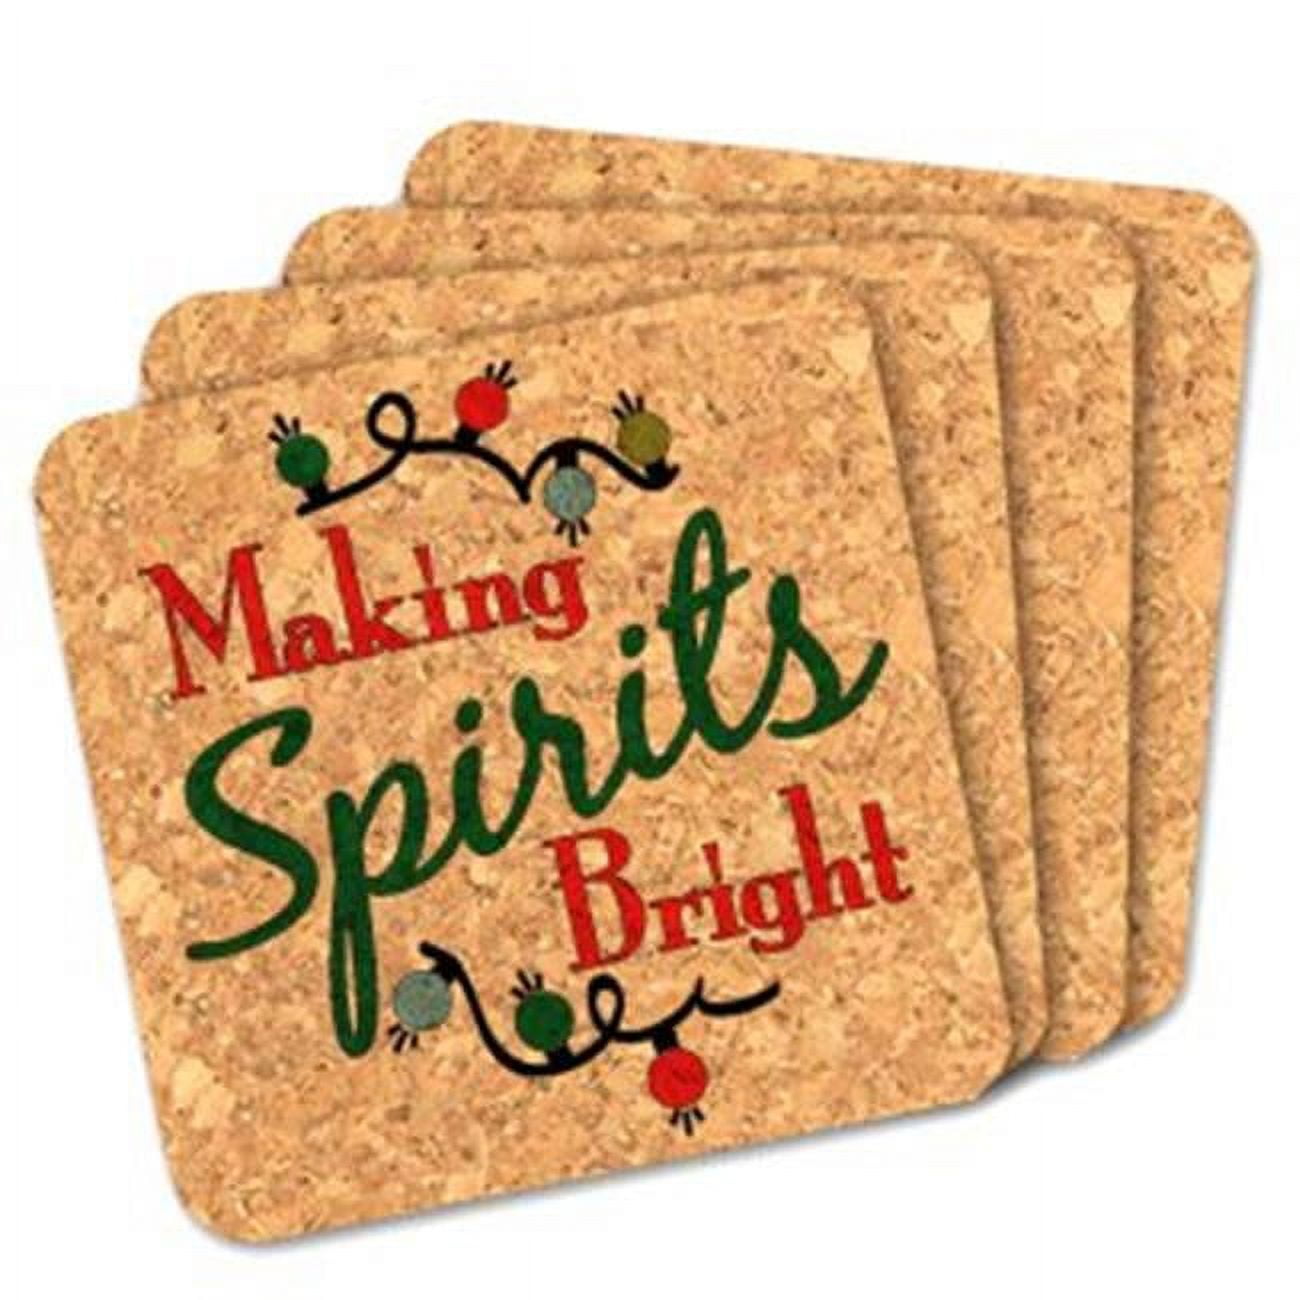 8407240 4 X 4 In. Making Spirits Bright Square Cork Coasters - Set Of 4